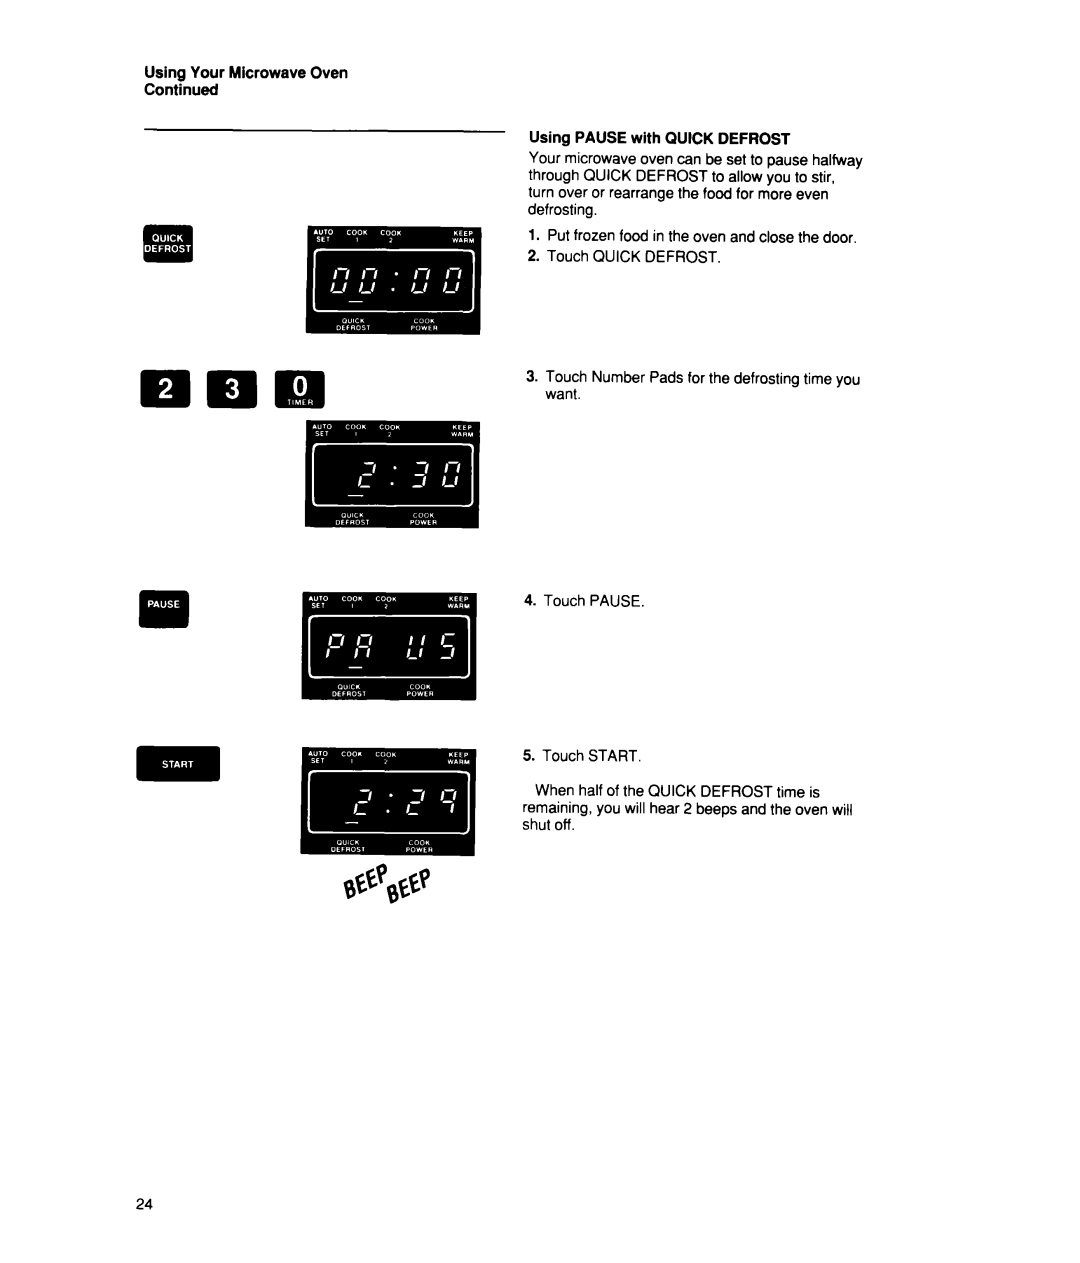 Whirlpool MT2150XW manual Using Your Microwave Oven Continued, Using PAUSE with QUICK DEFROST, Touch START 